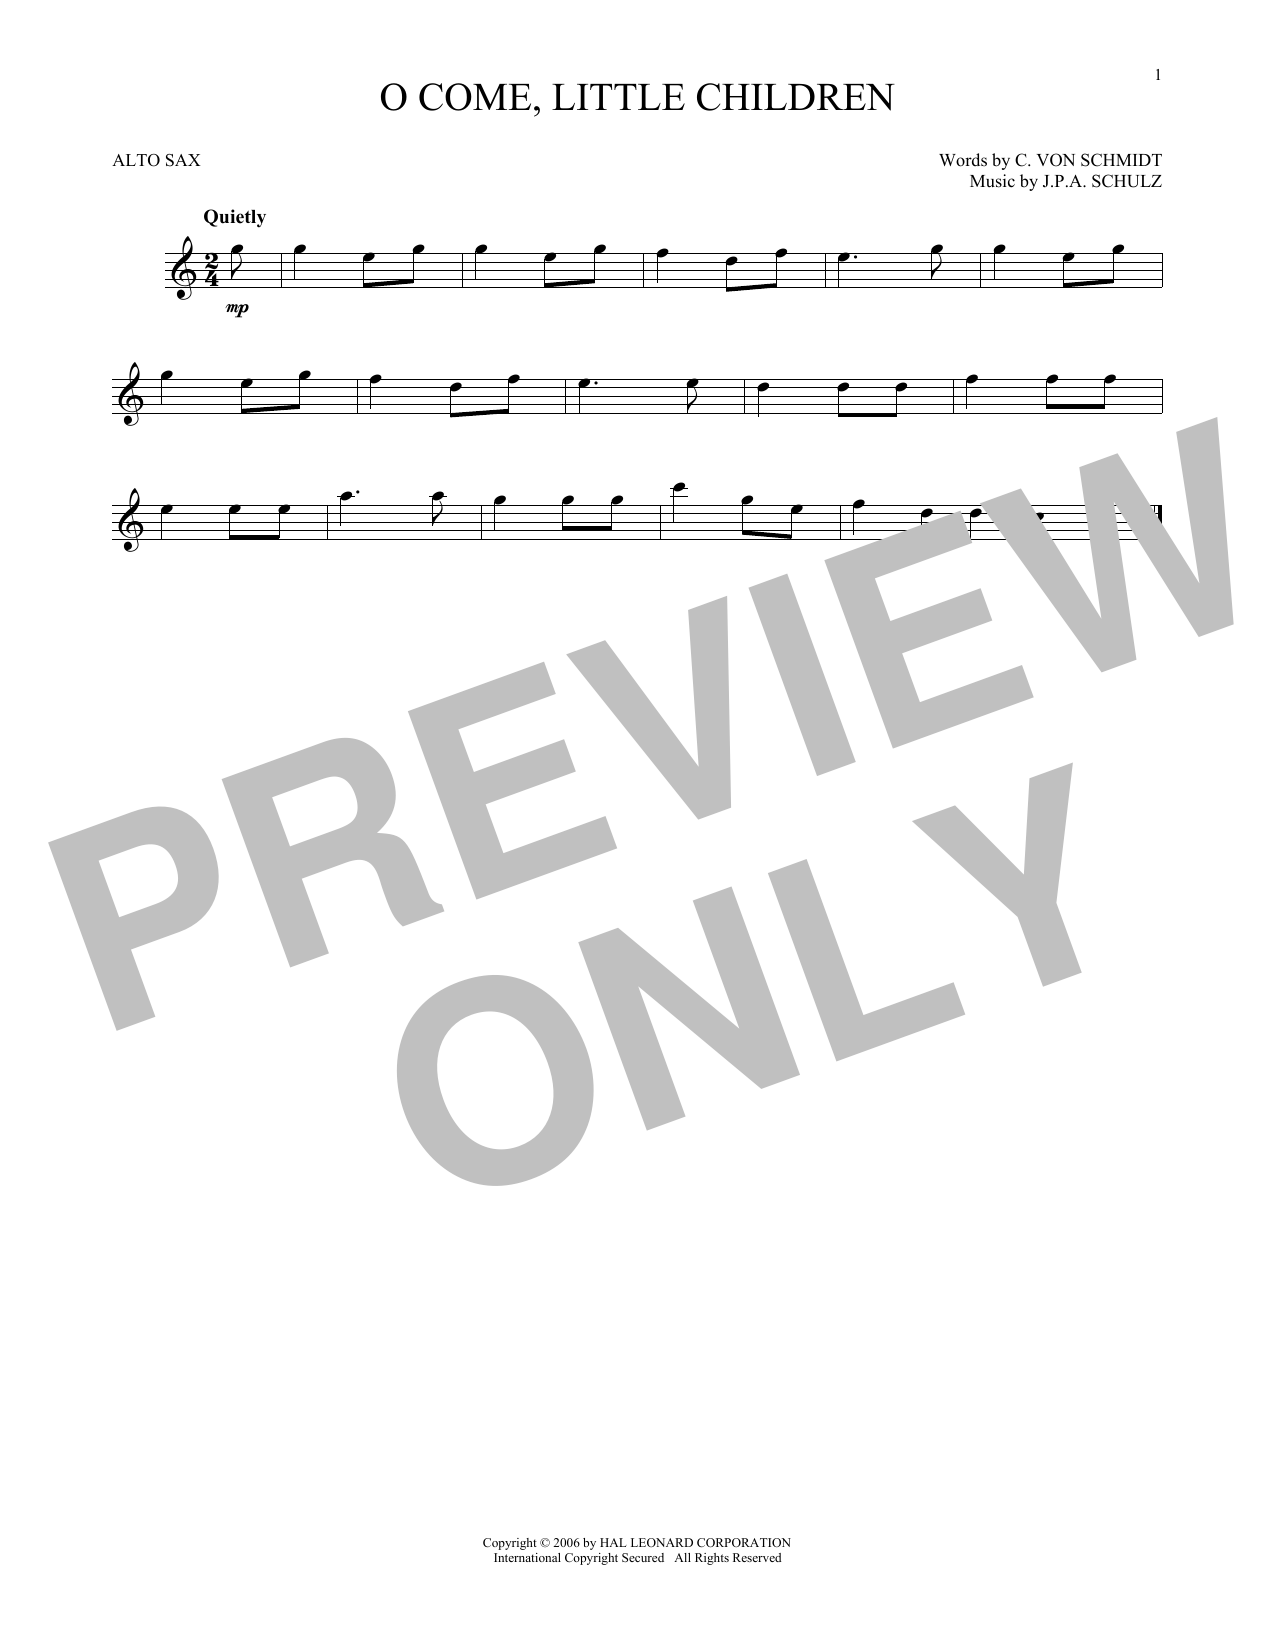 J.P.A. Schulz O Come, Little Children sheet music notes and chords. Download Printable PDF.